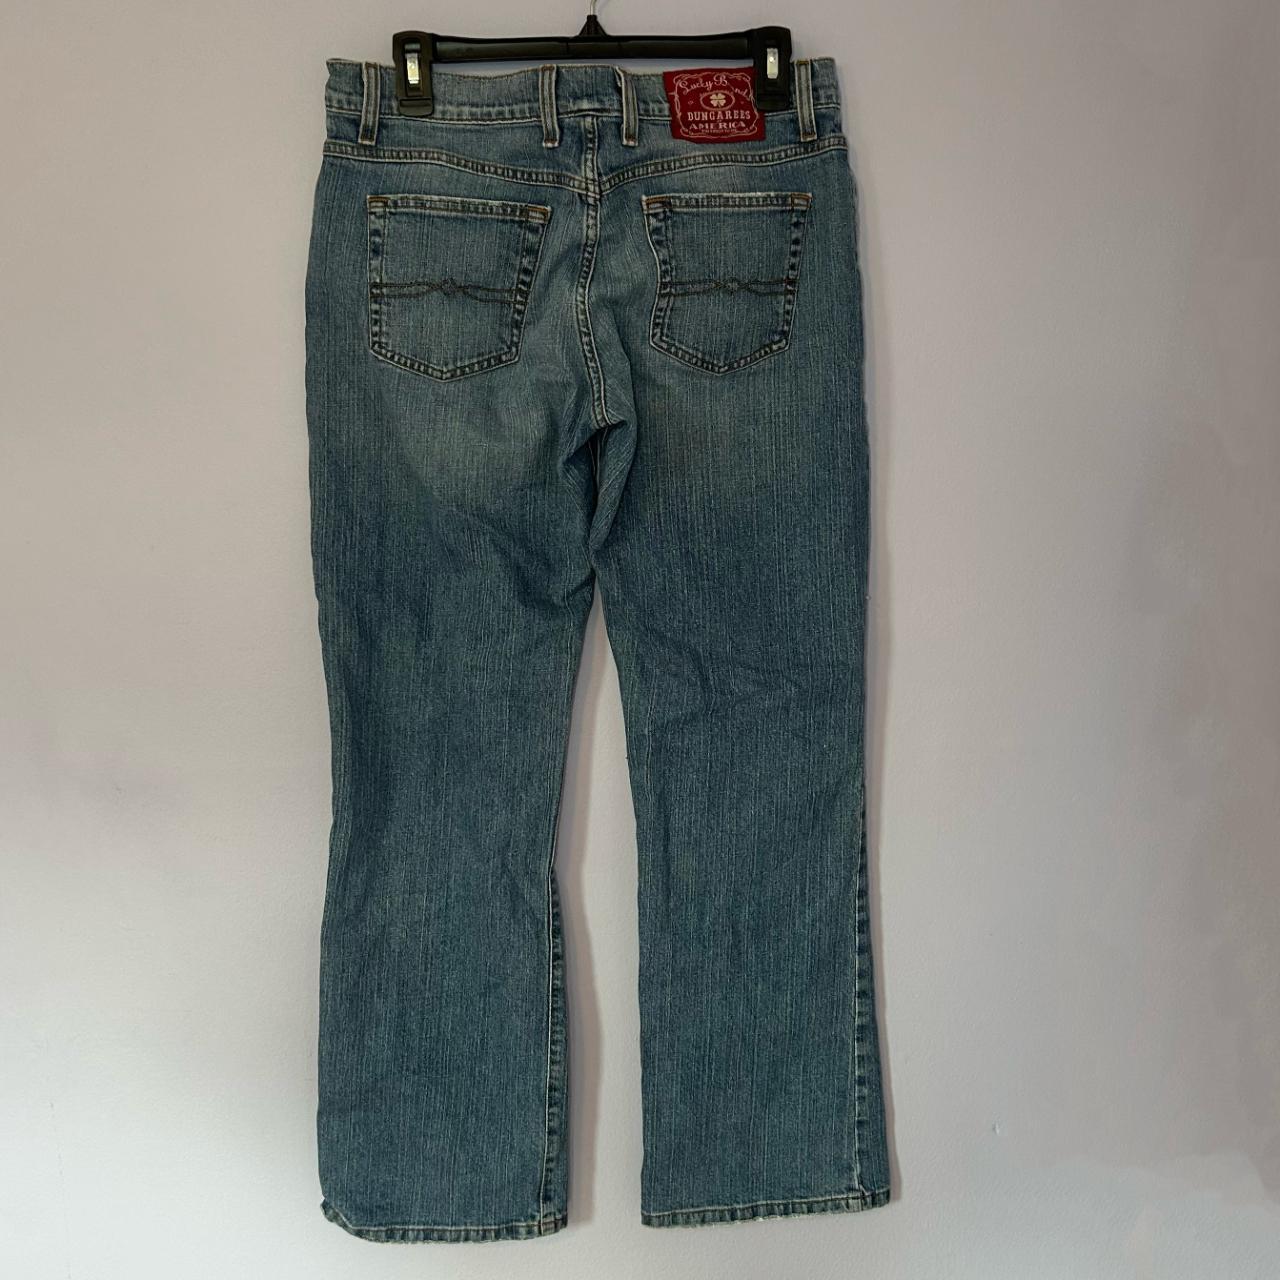 Y2K LUCKY BRAND DUNGAREES JEANS these are so - Depop